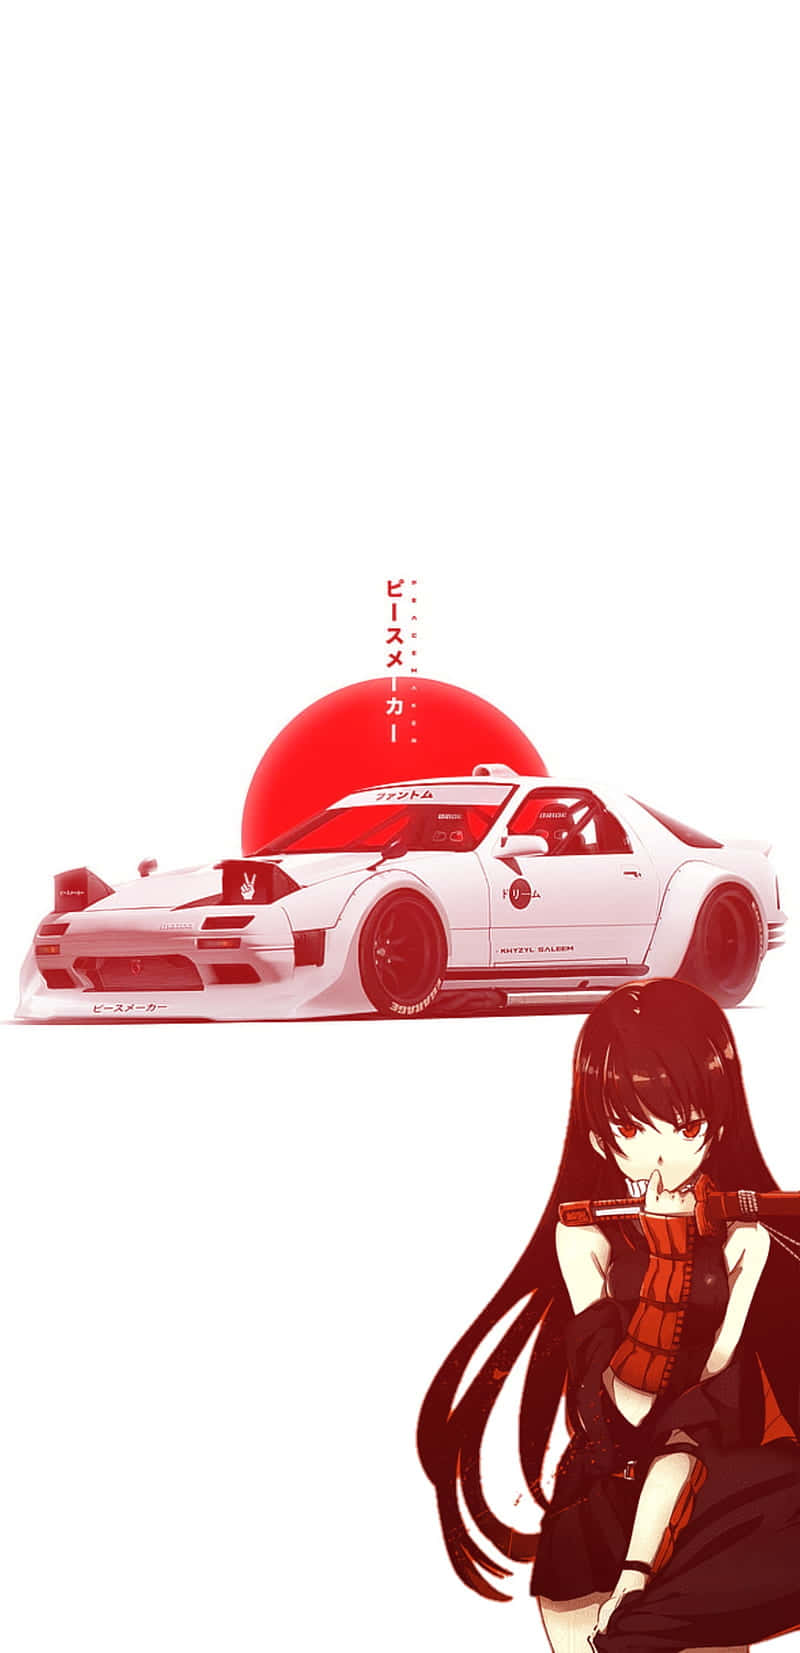 Download Rx 7 Against The Flag Of Japan Jdm Anime Wallpaper 